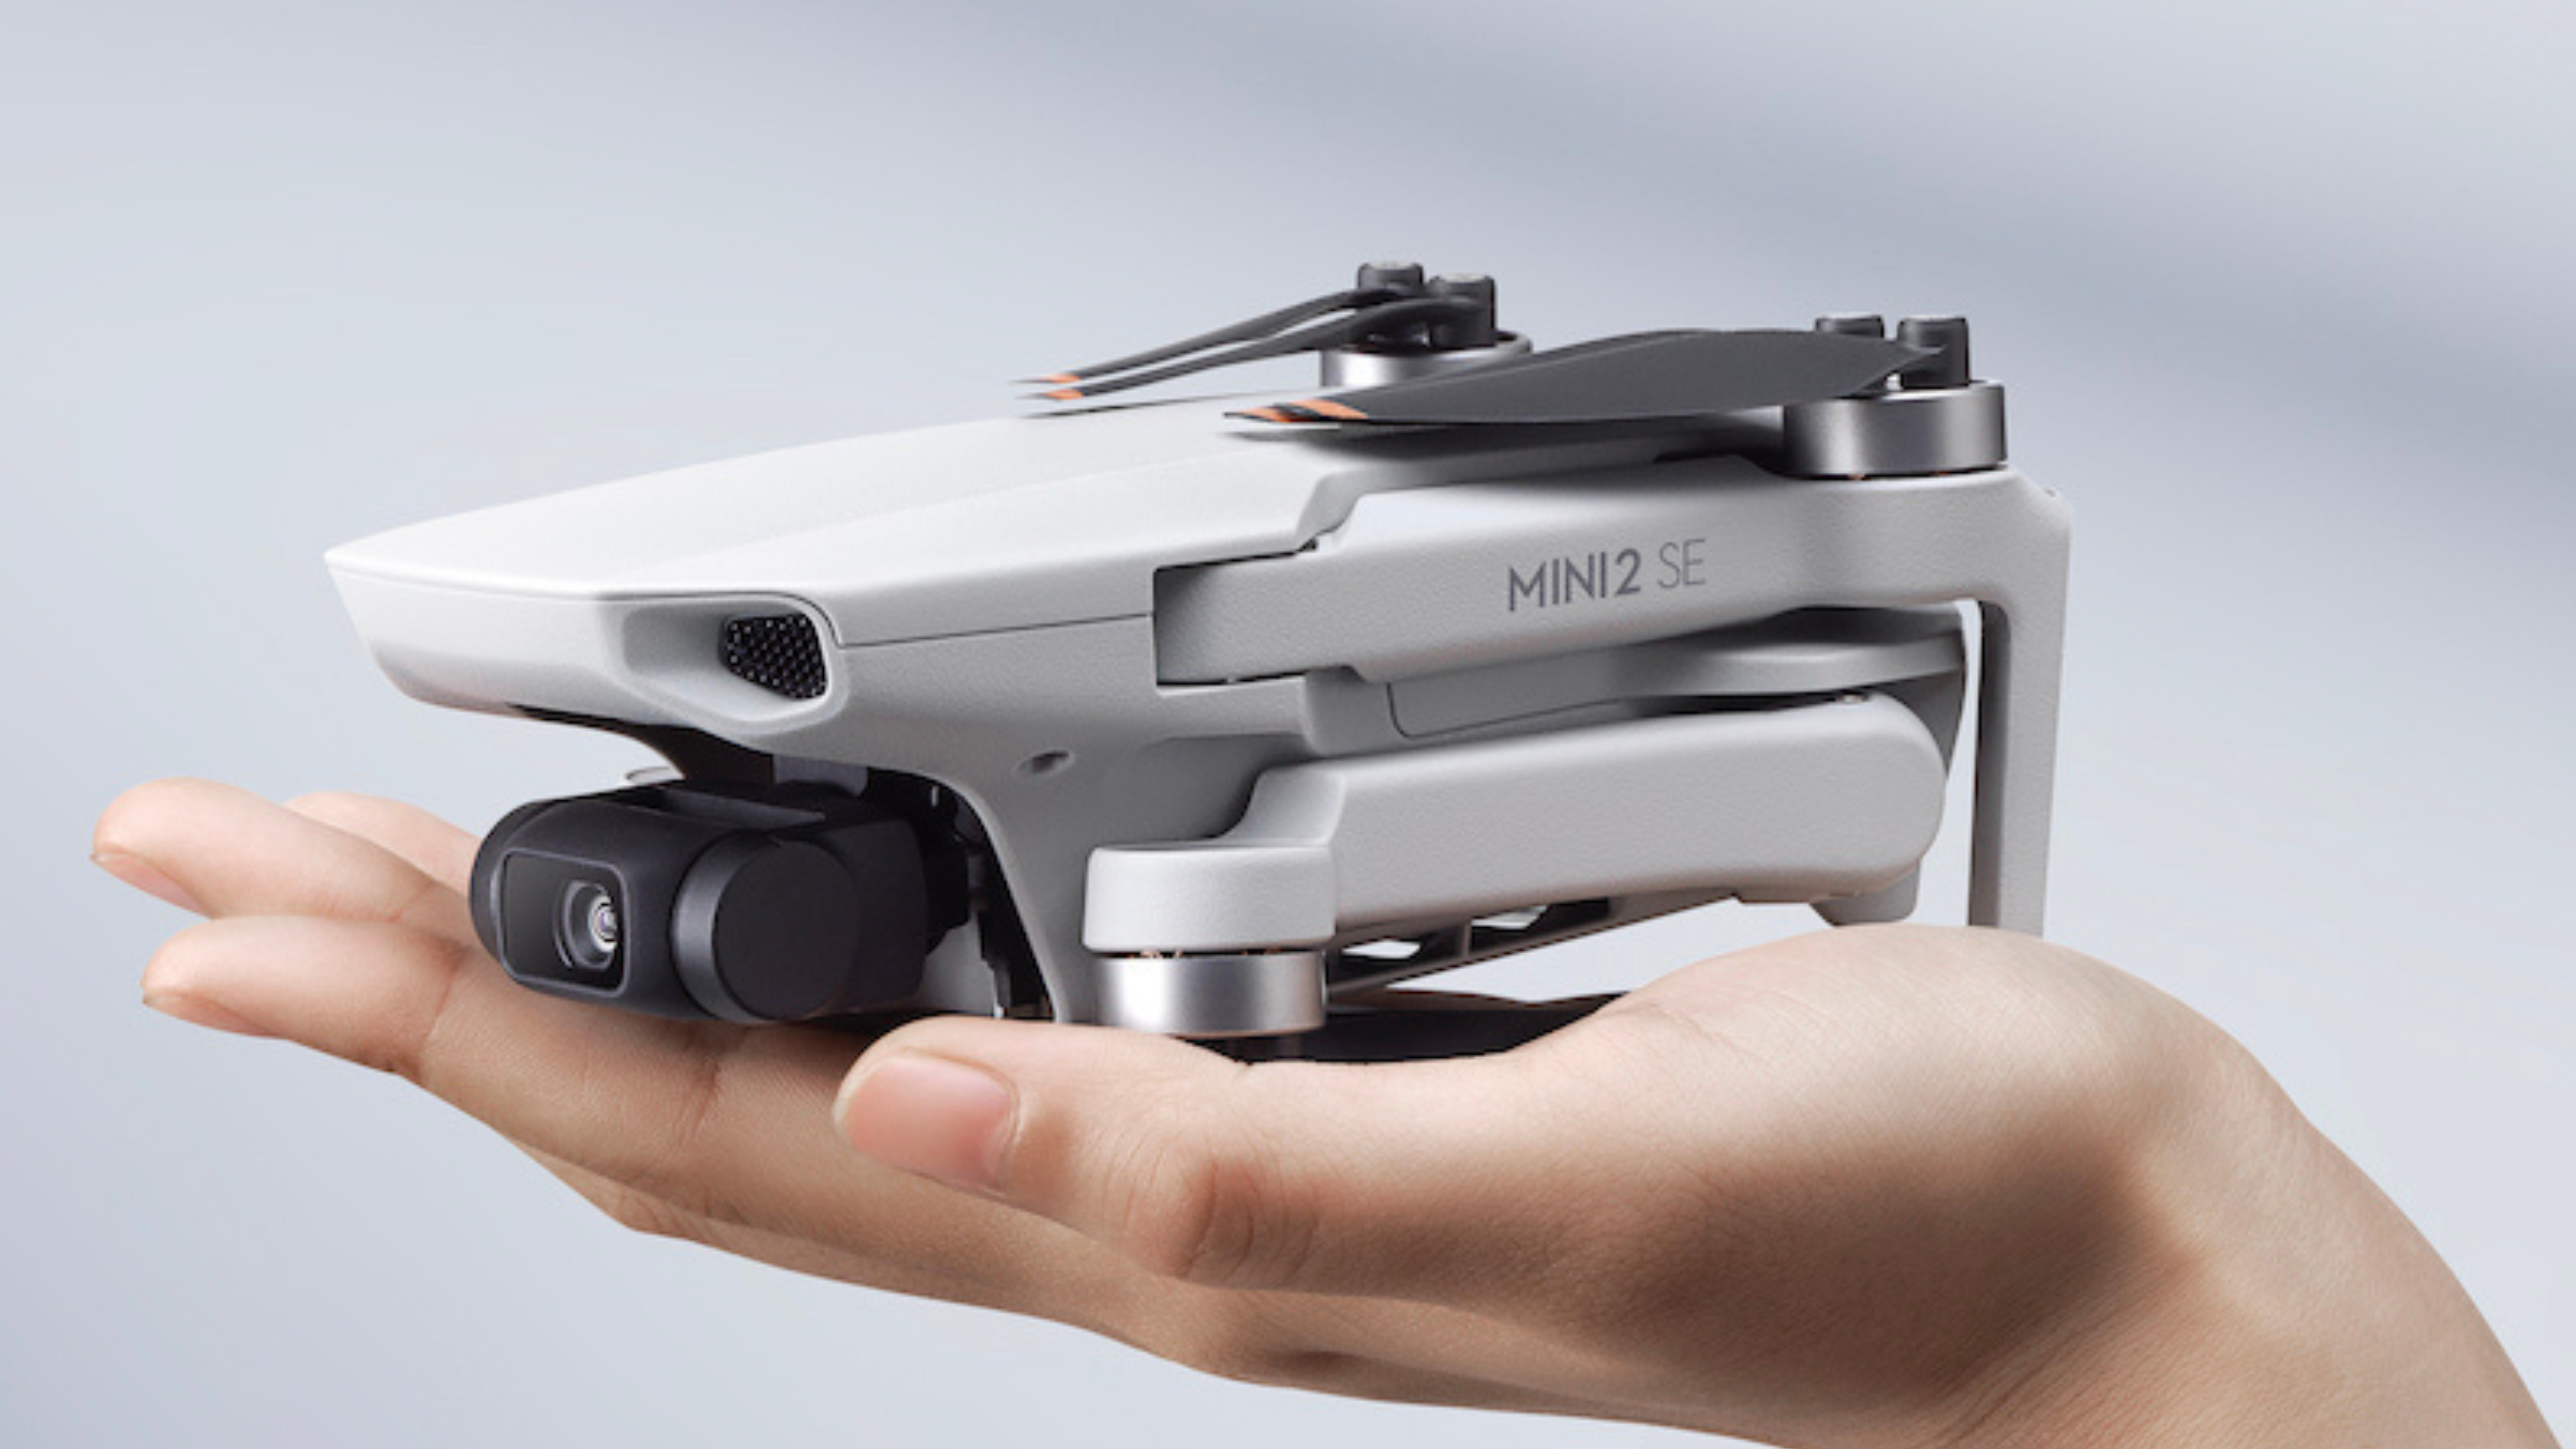 DJI Mini 2 SE in hand, showing how small it is